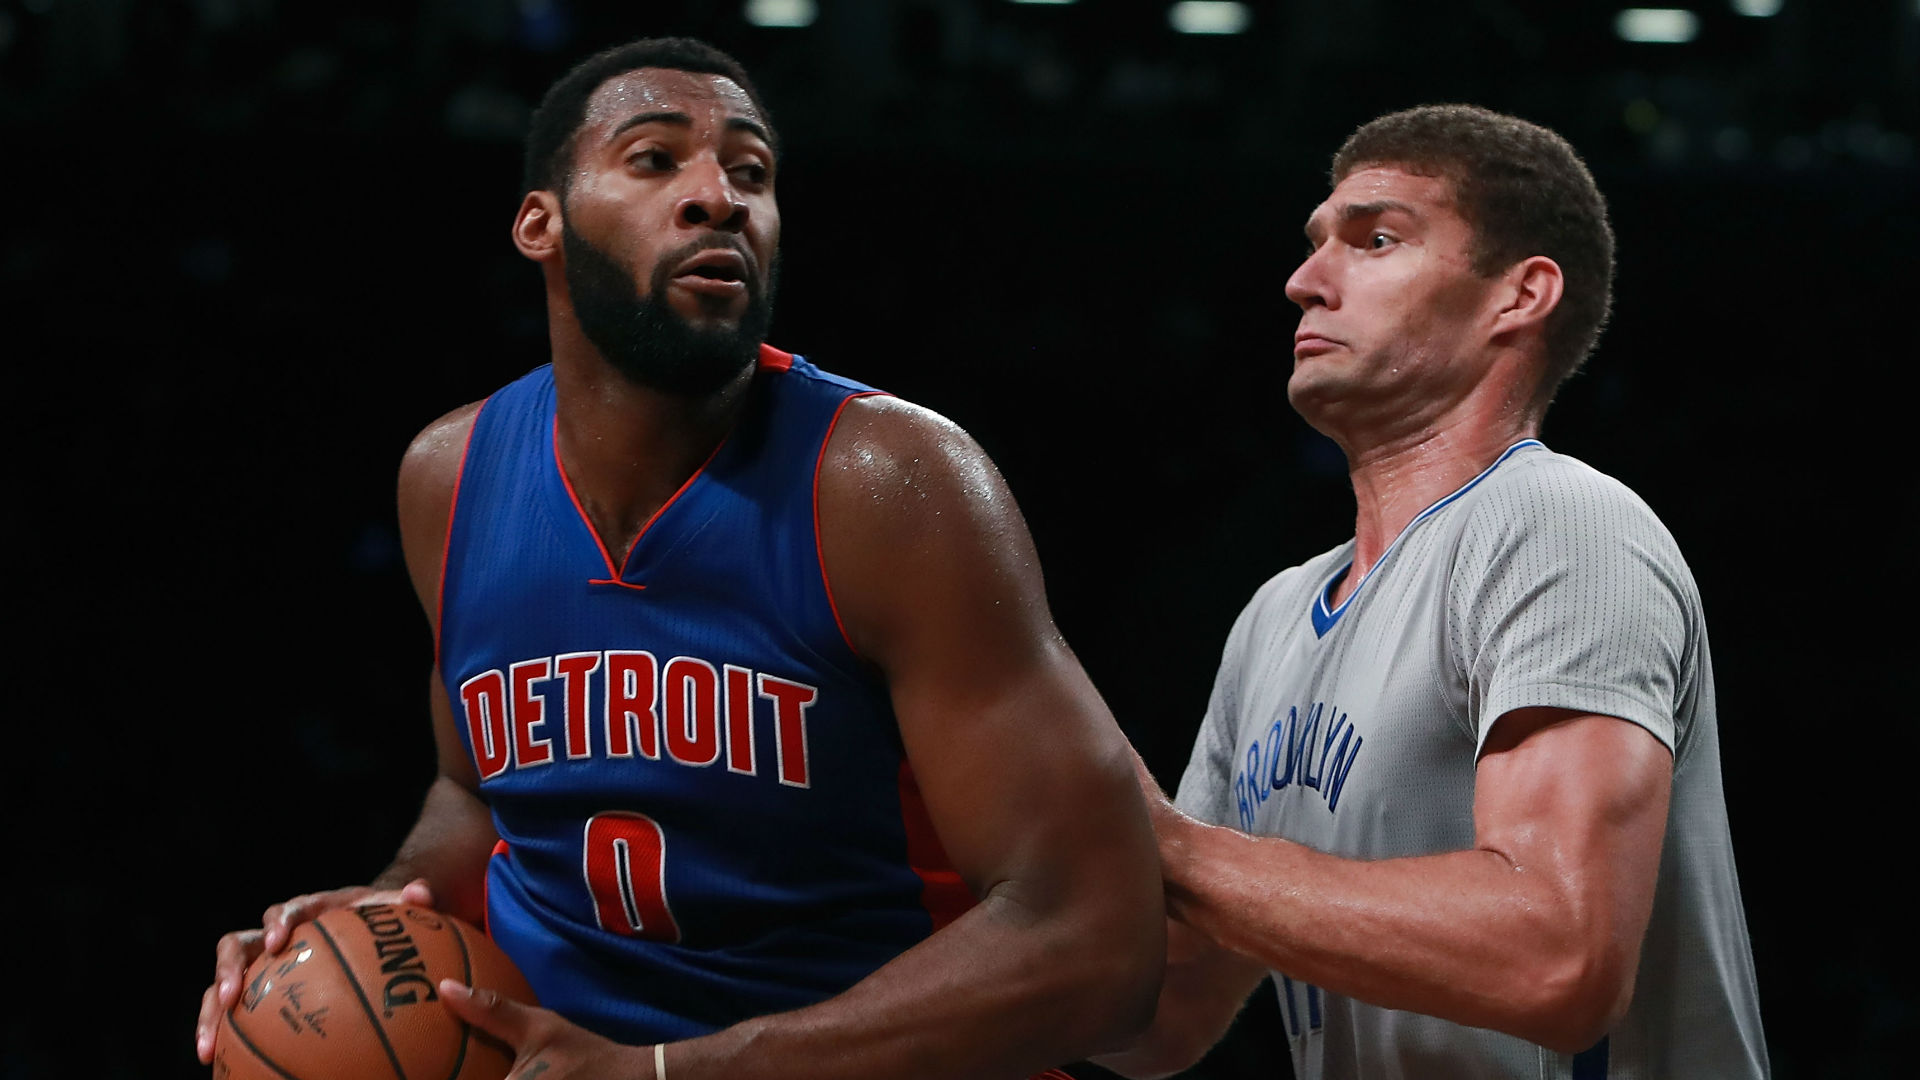 Andre Drummond is bringing the 'Bad Boys' style of play back to Pistons | NBA ...1920 x 1080